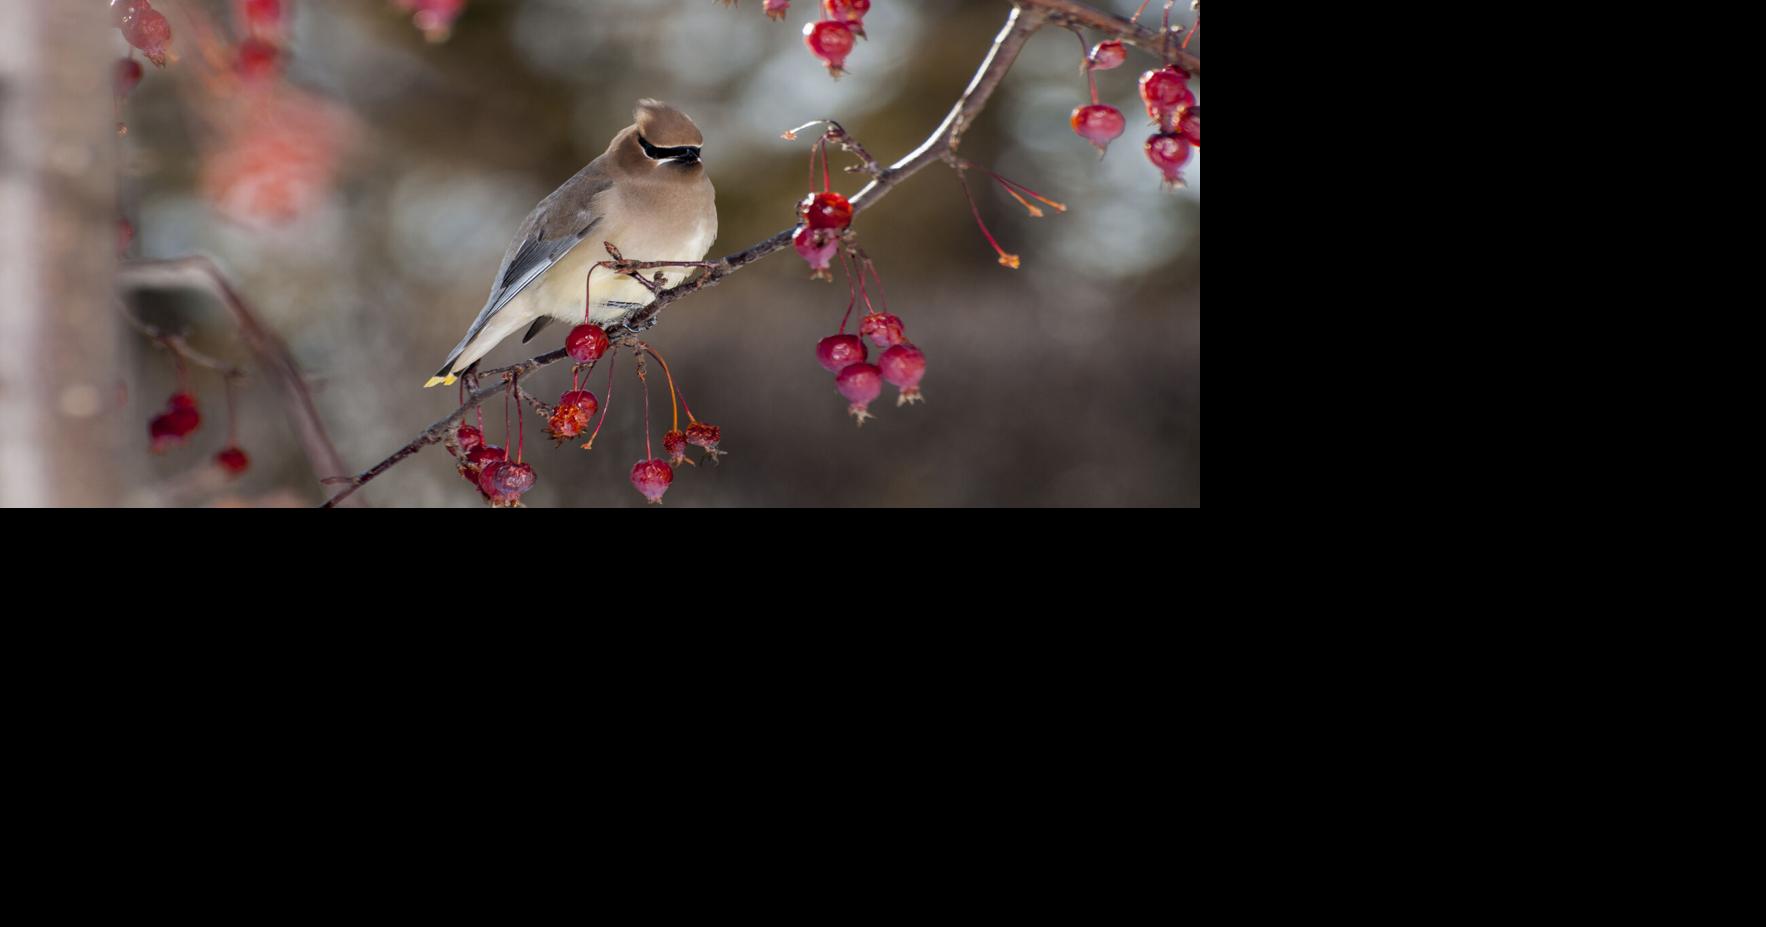 Trees and shrubs with berries for birds and fall beauty